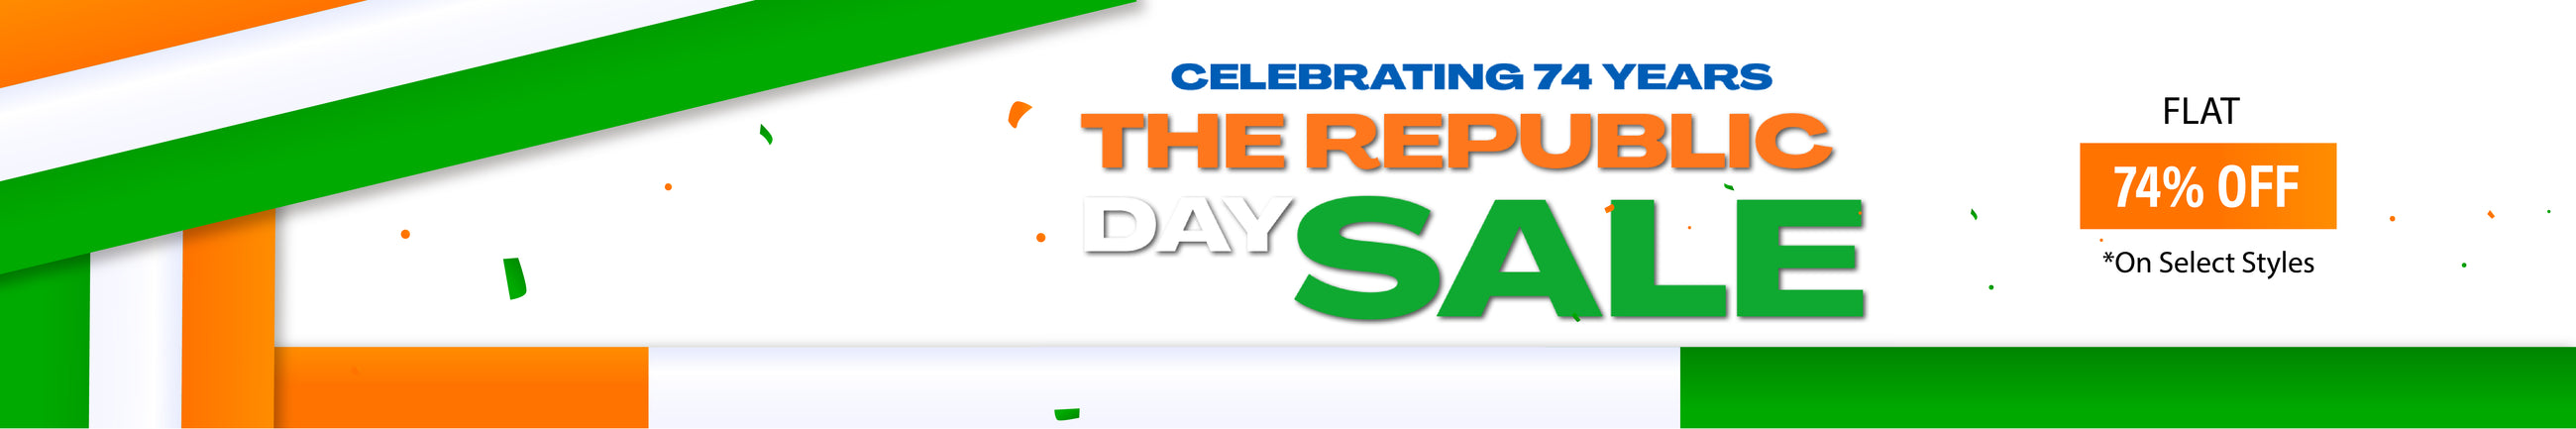 The Republic Day Sale - Flat 74% Off